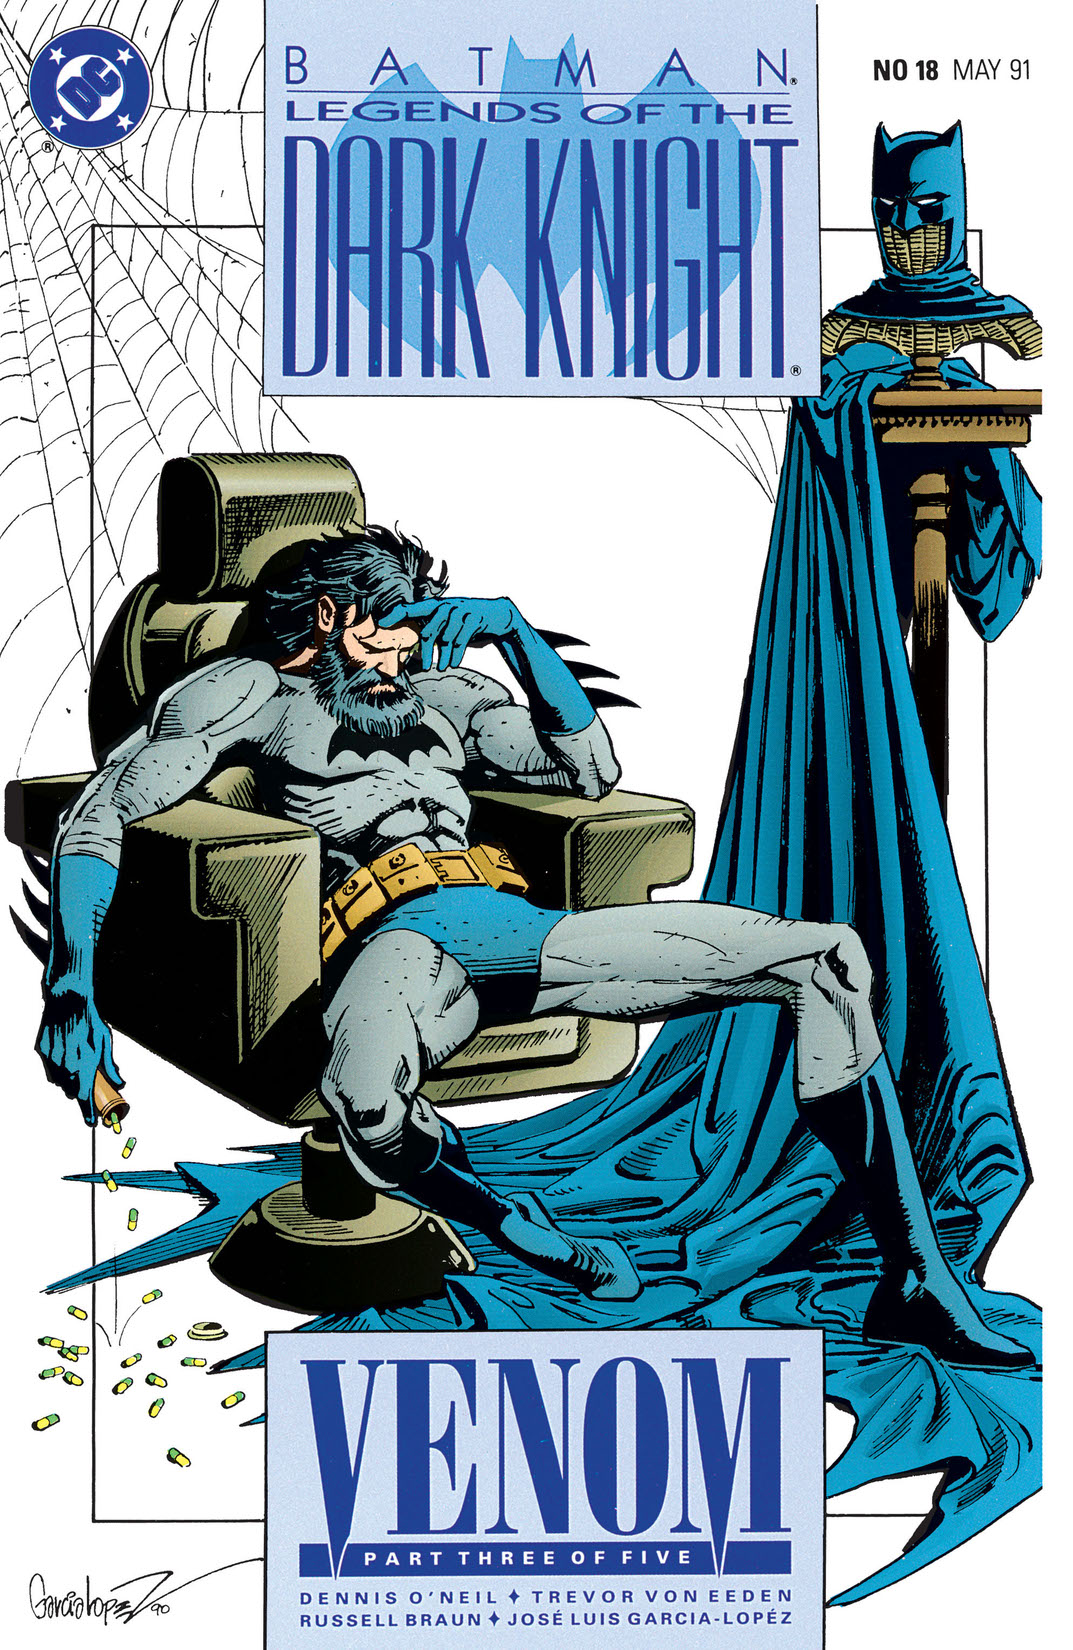 Batman: Legends of the Dark Knight #18 preview images